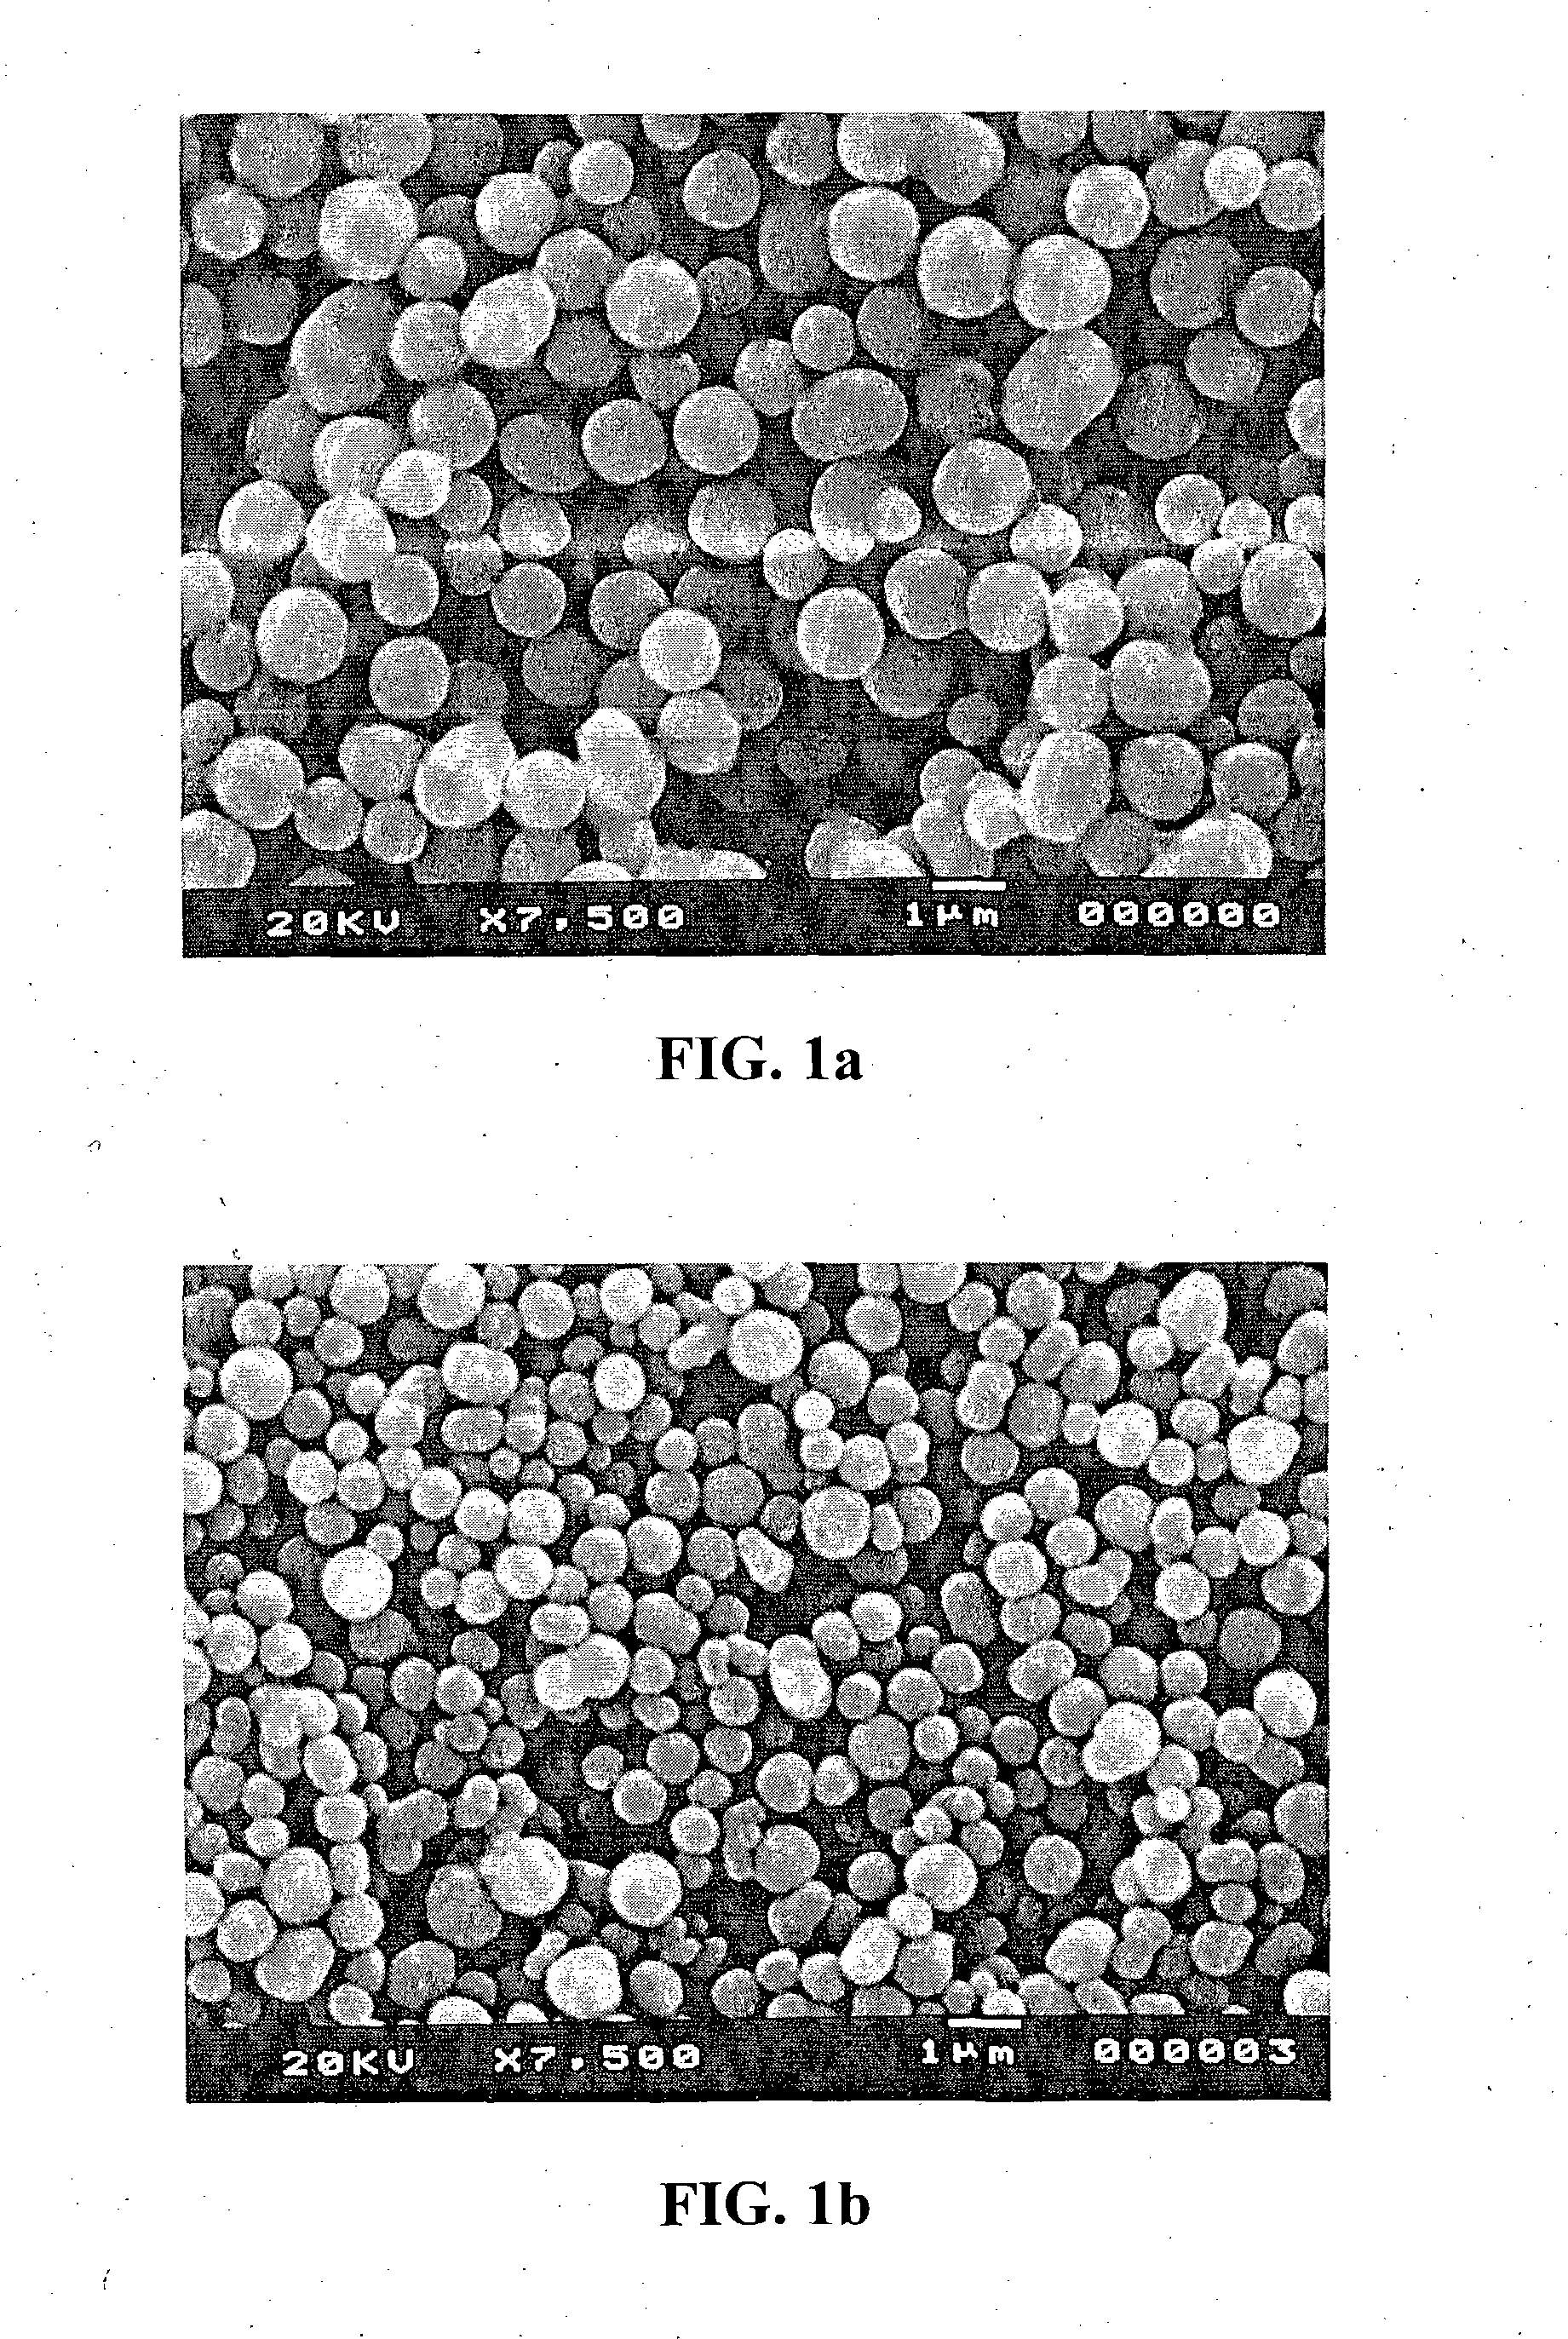 Method for making fine and ultrafine spherical particles of zirconium titanate and other mixed metal oxide systems